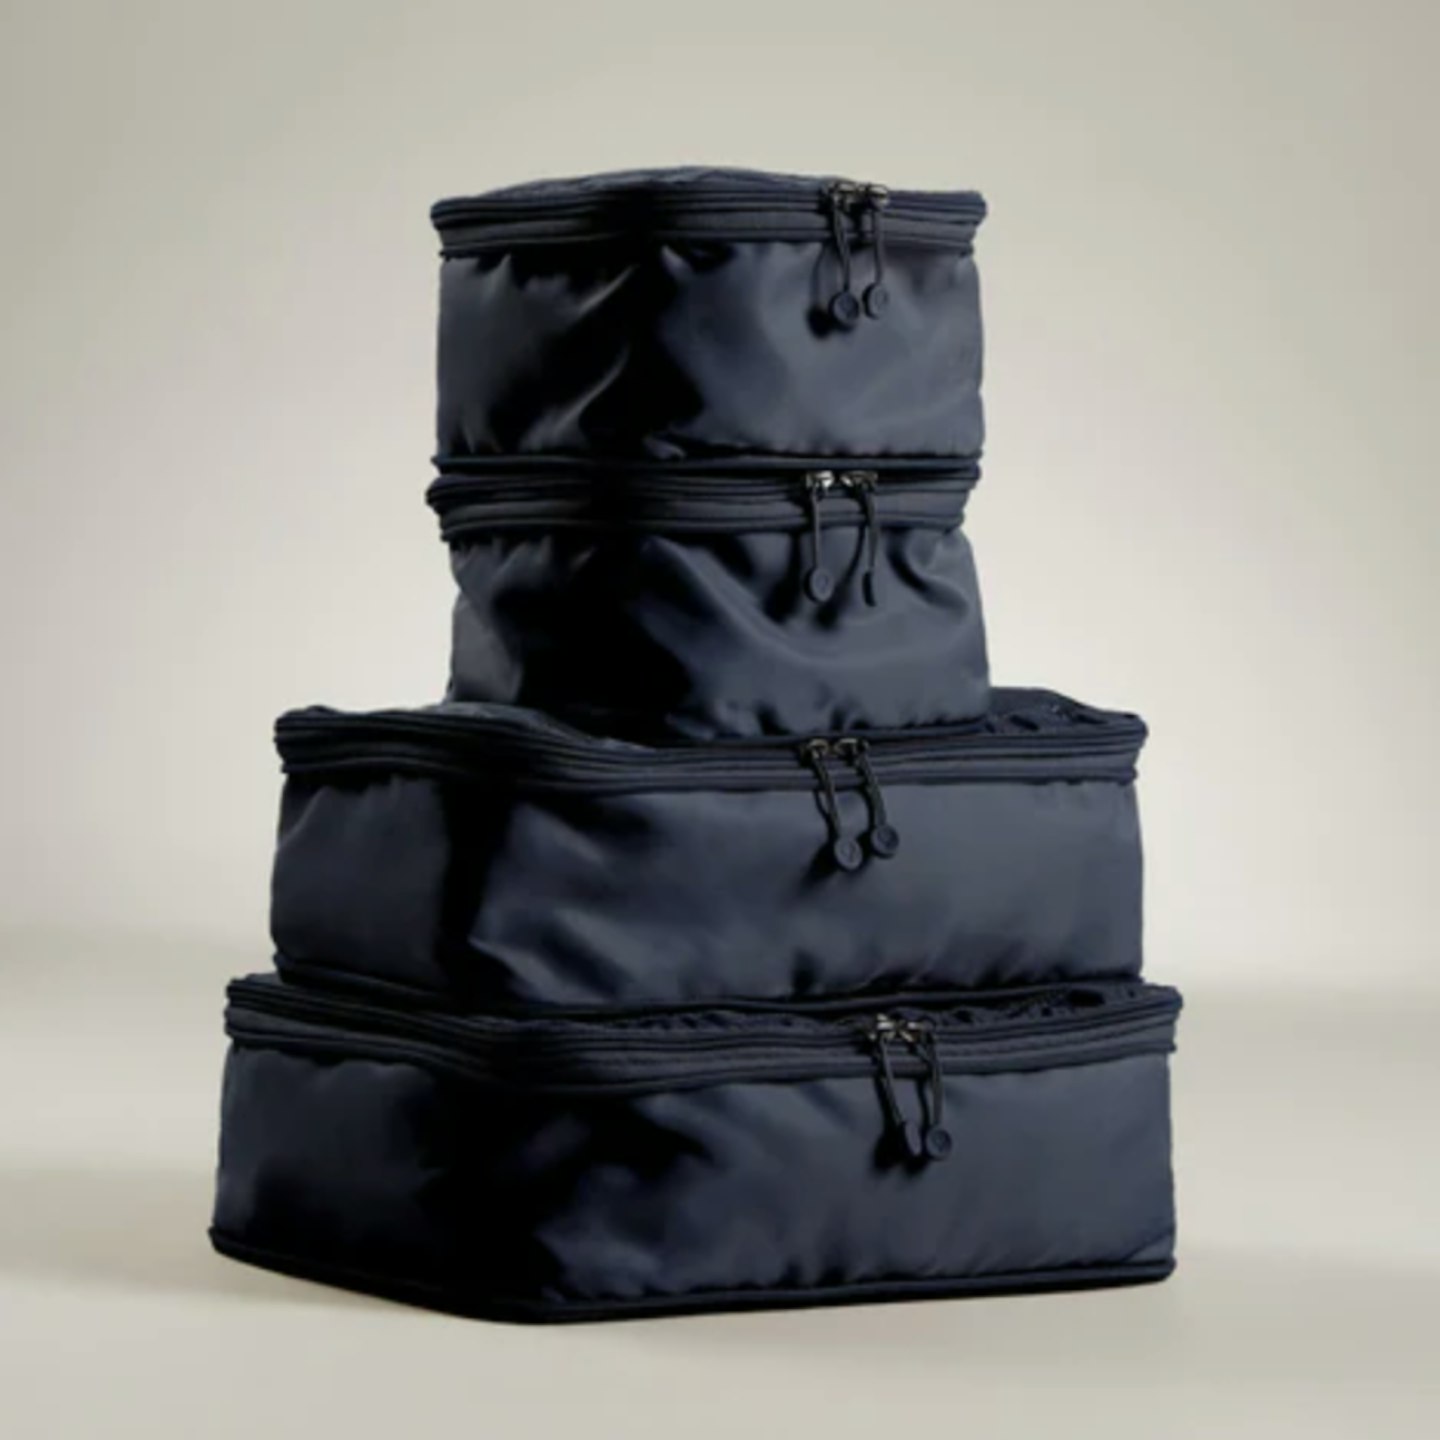 Chelsea 4 Packing Cubes In Navy 